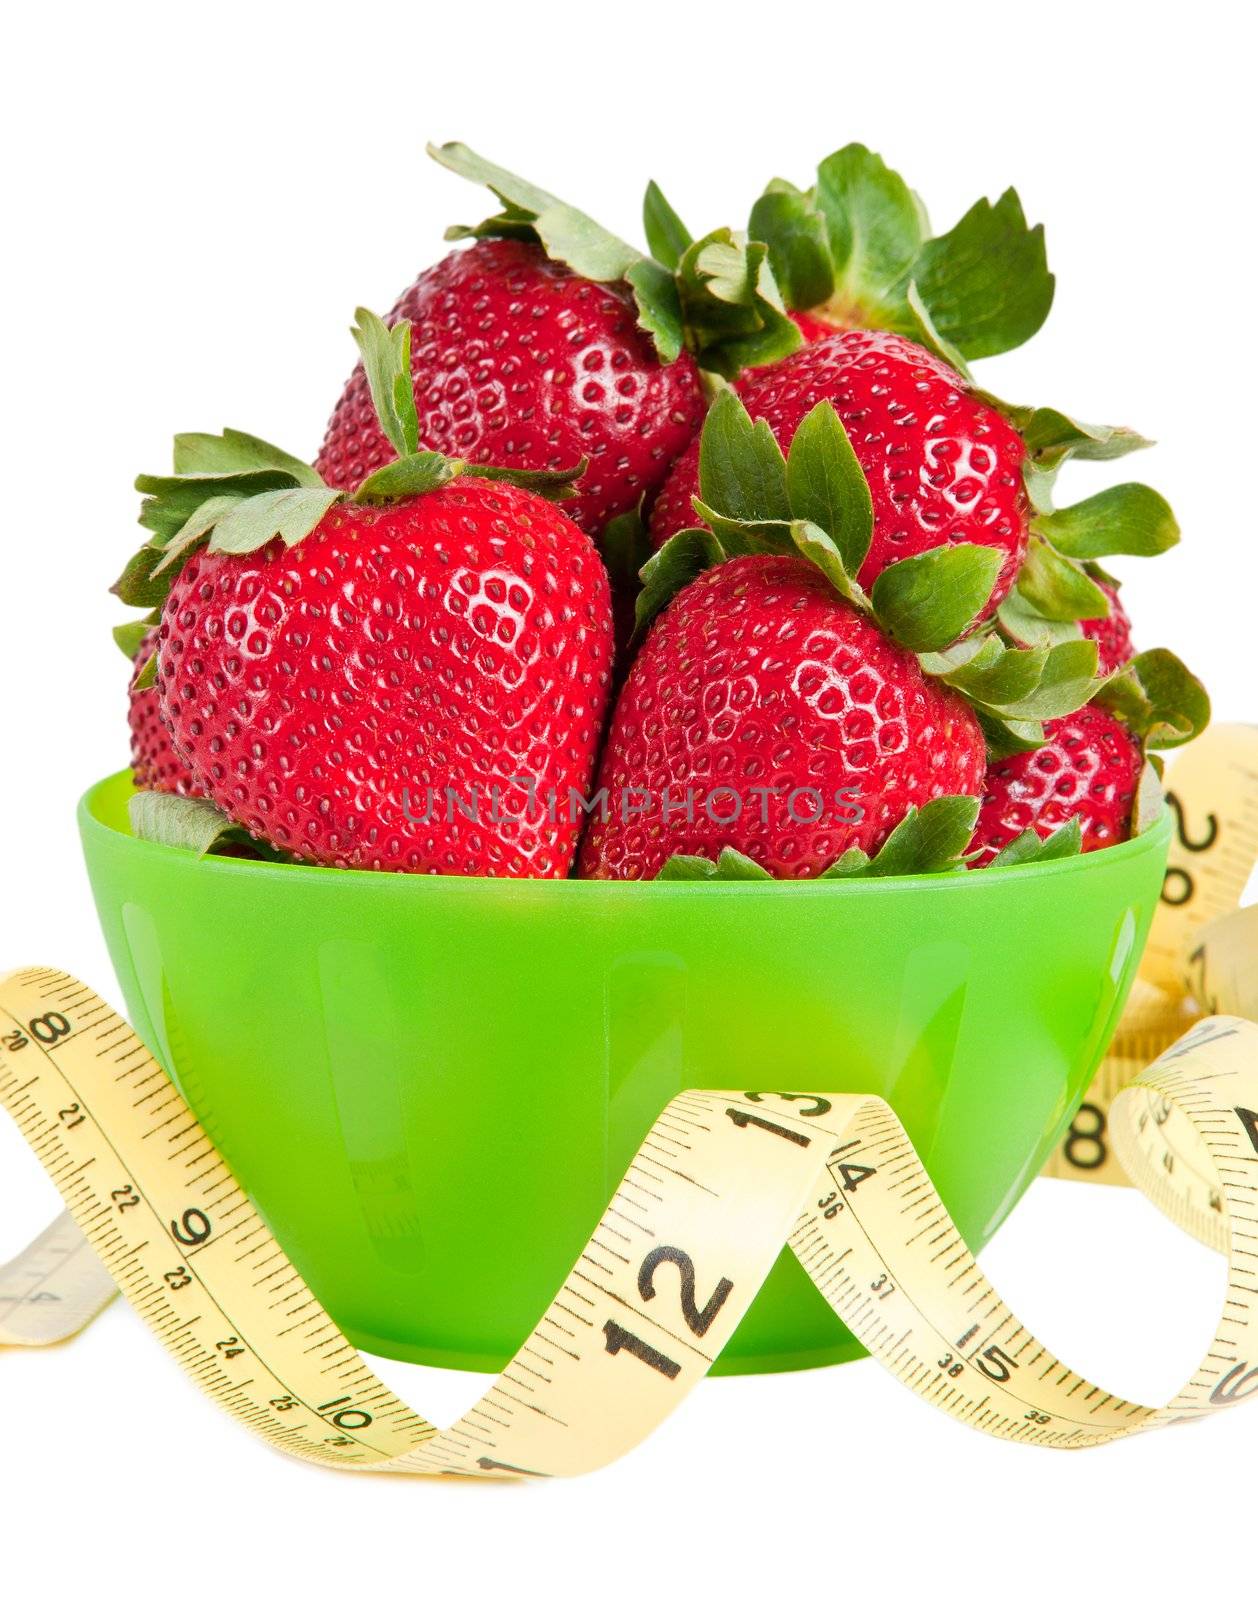 Green bowl of strawberries with a yellow measuring tape in front of it